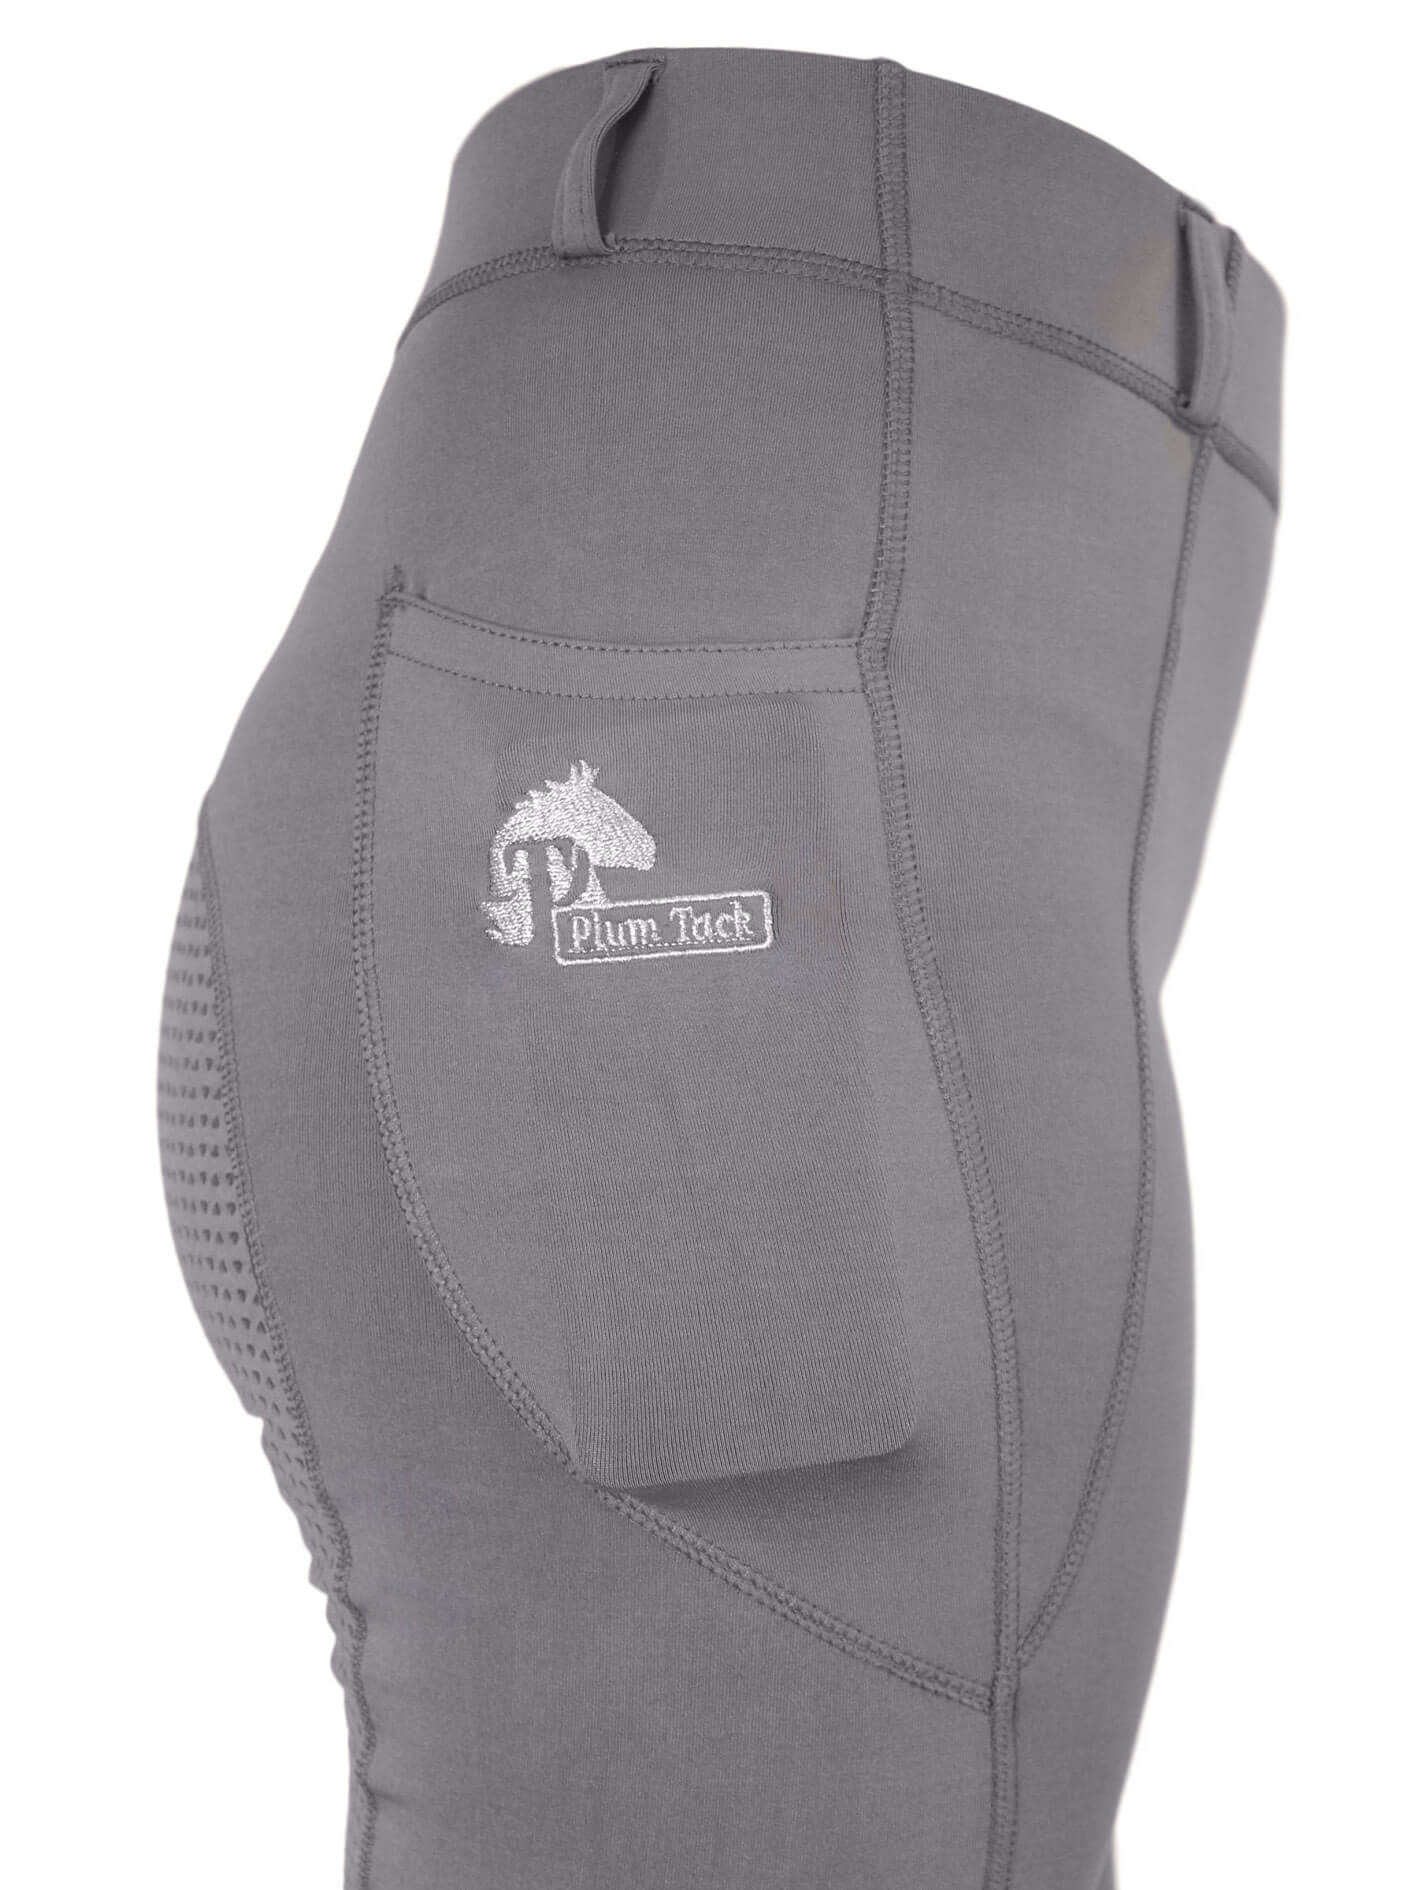 Close-up of gray horse riding tights with Plum Tack logo.